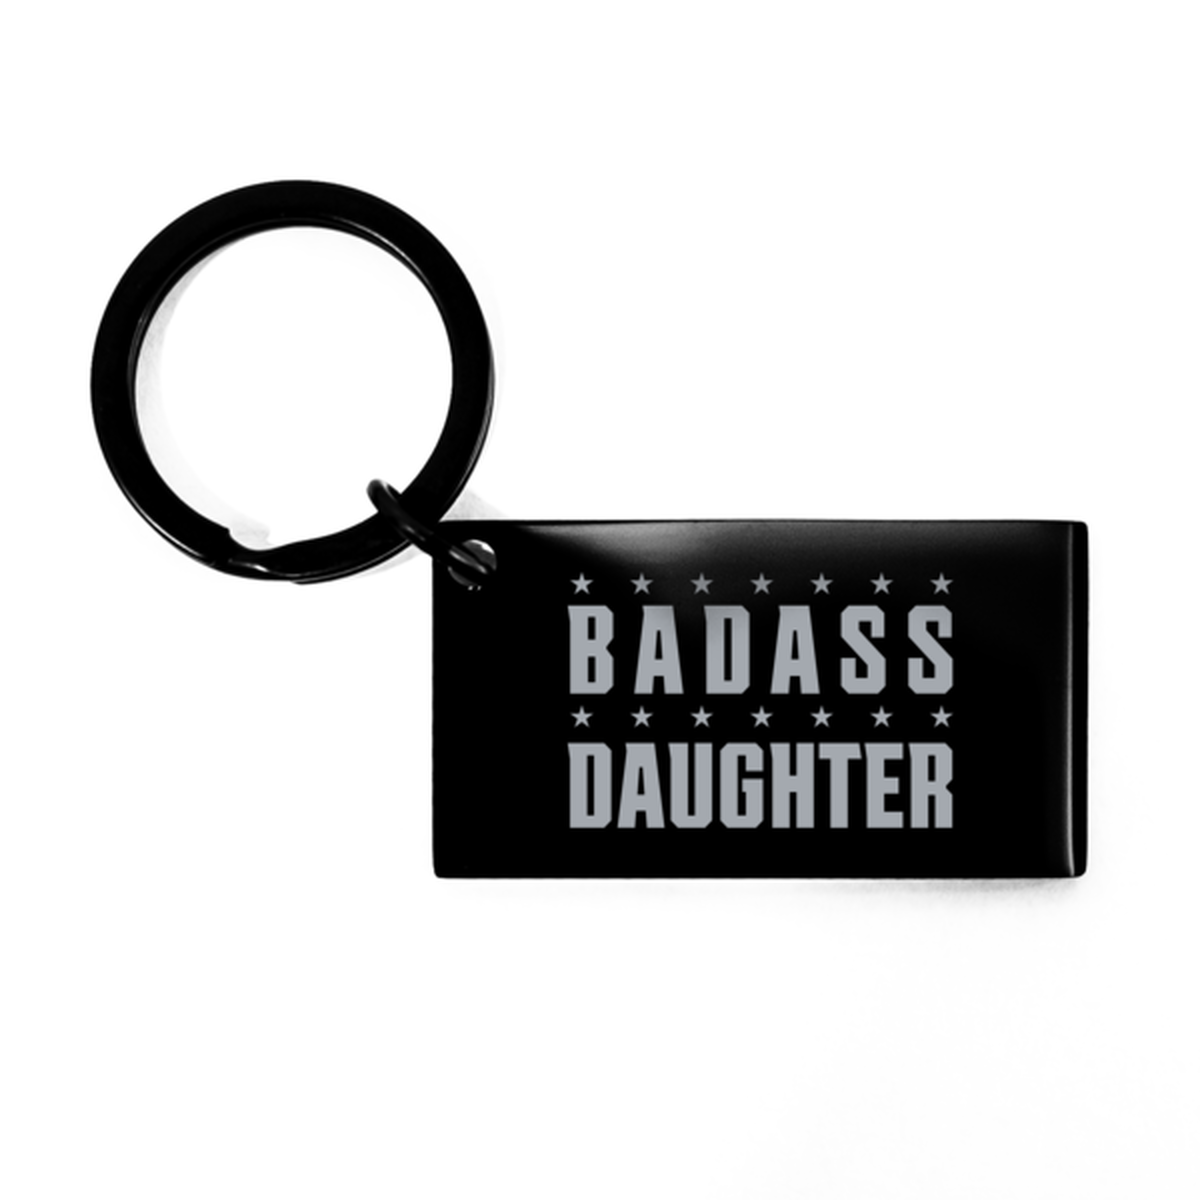 Daughter Black Keychain, Badass Daughter, Funny Family Gifts  Keyring For Daughter From Mom Dad